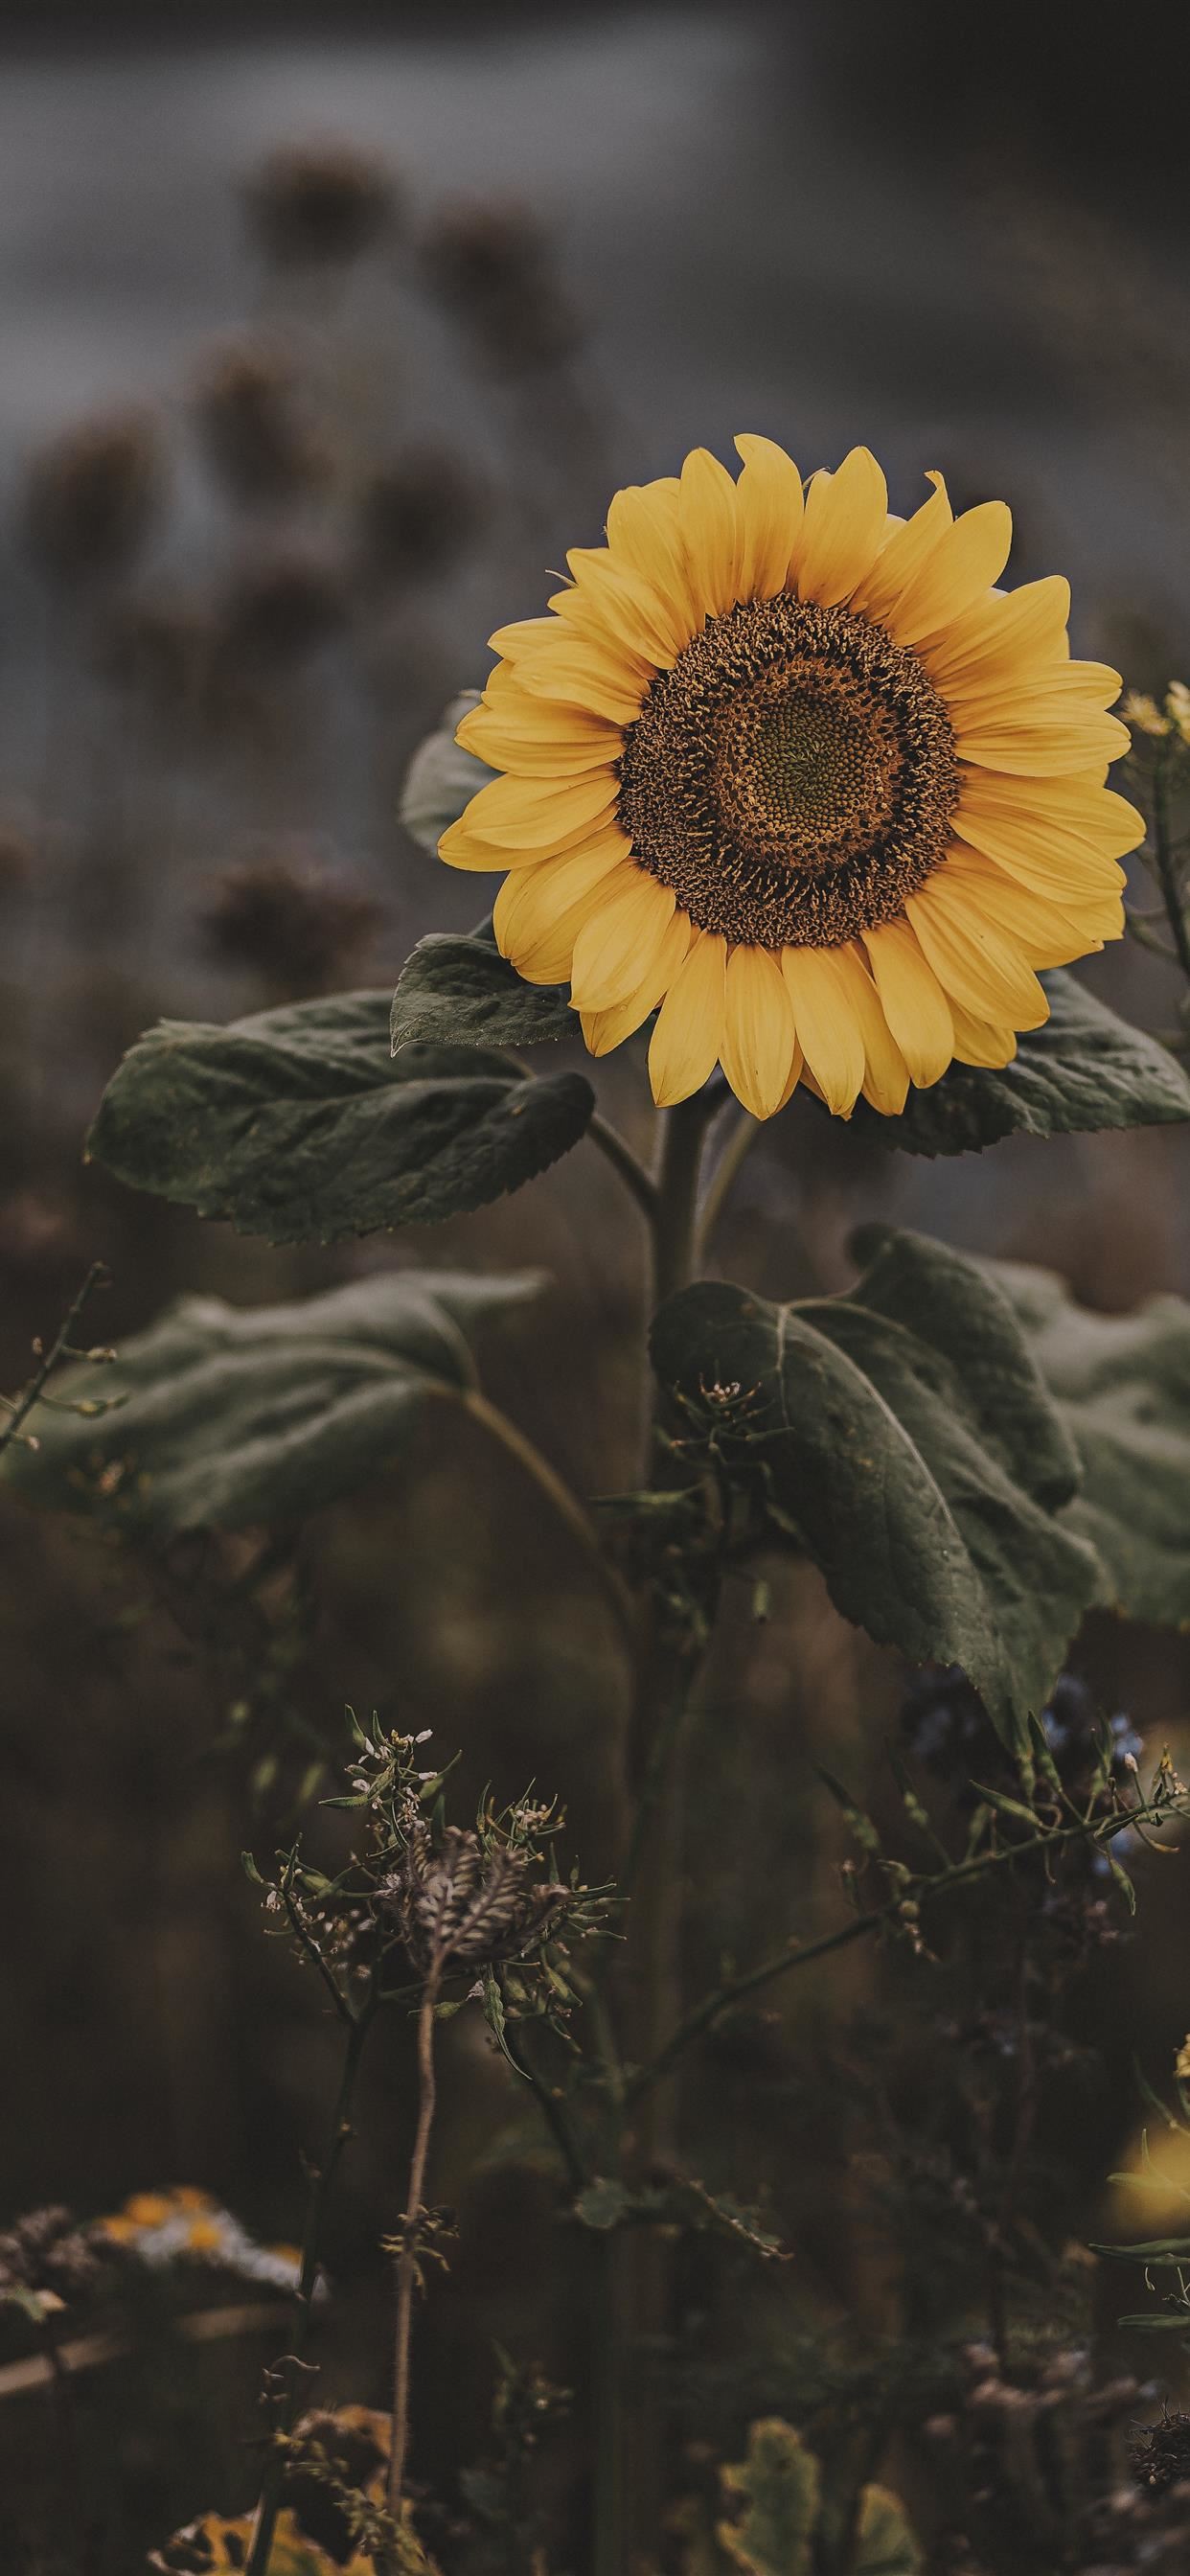 Sunflower Iphone Wallpapers Free Download